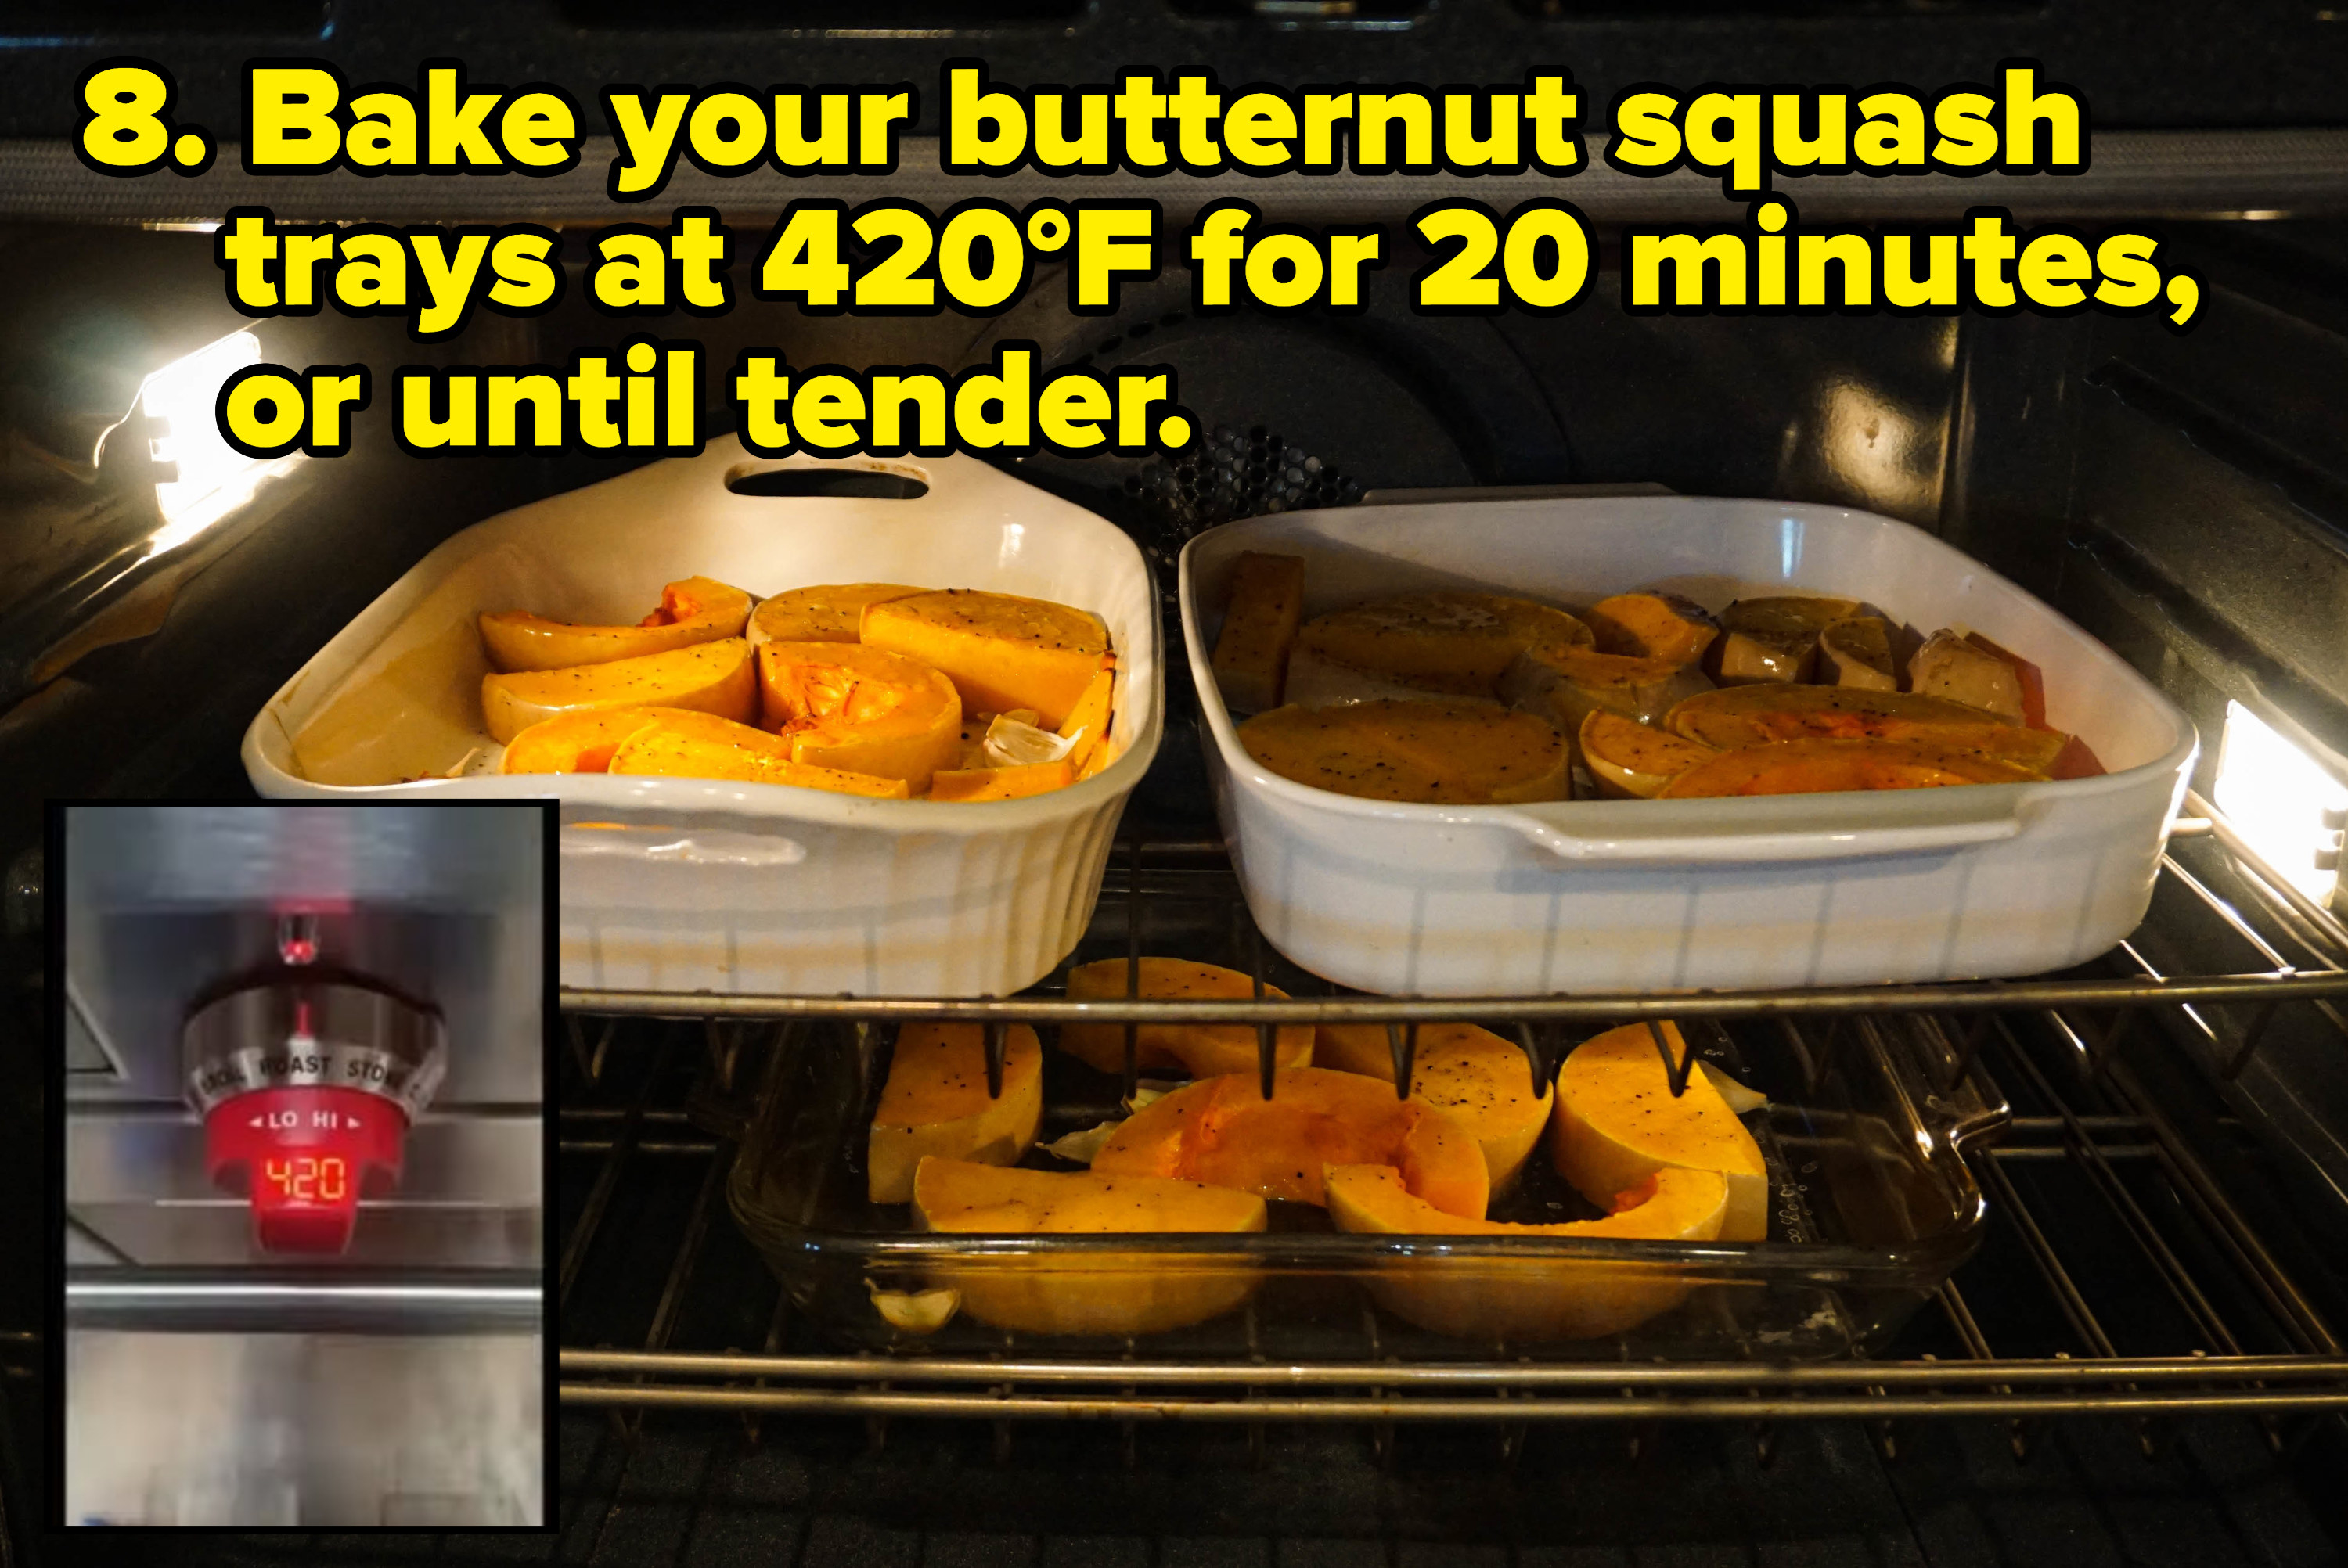 butternut squash slices in tray in oven (insest) florence pugh&#x27;s oven at 420